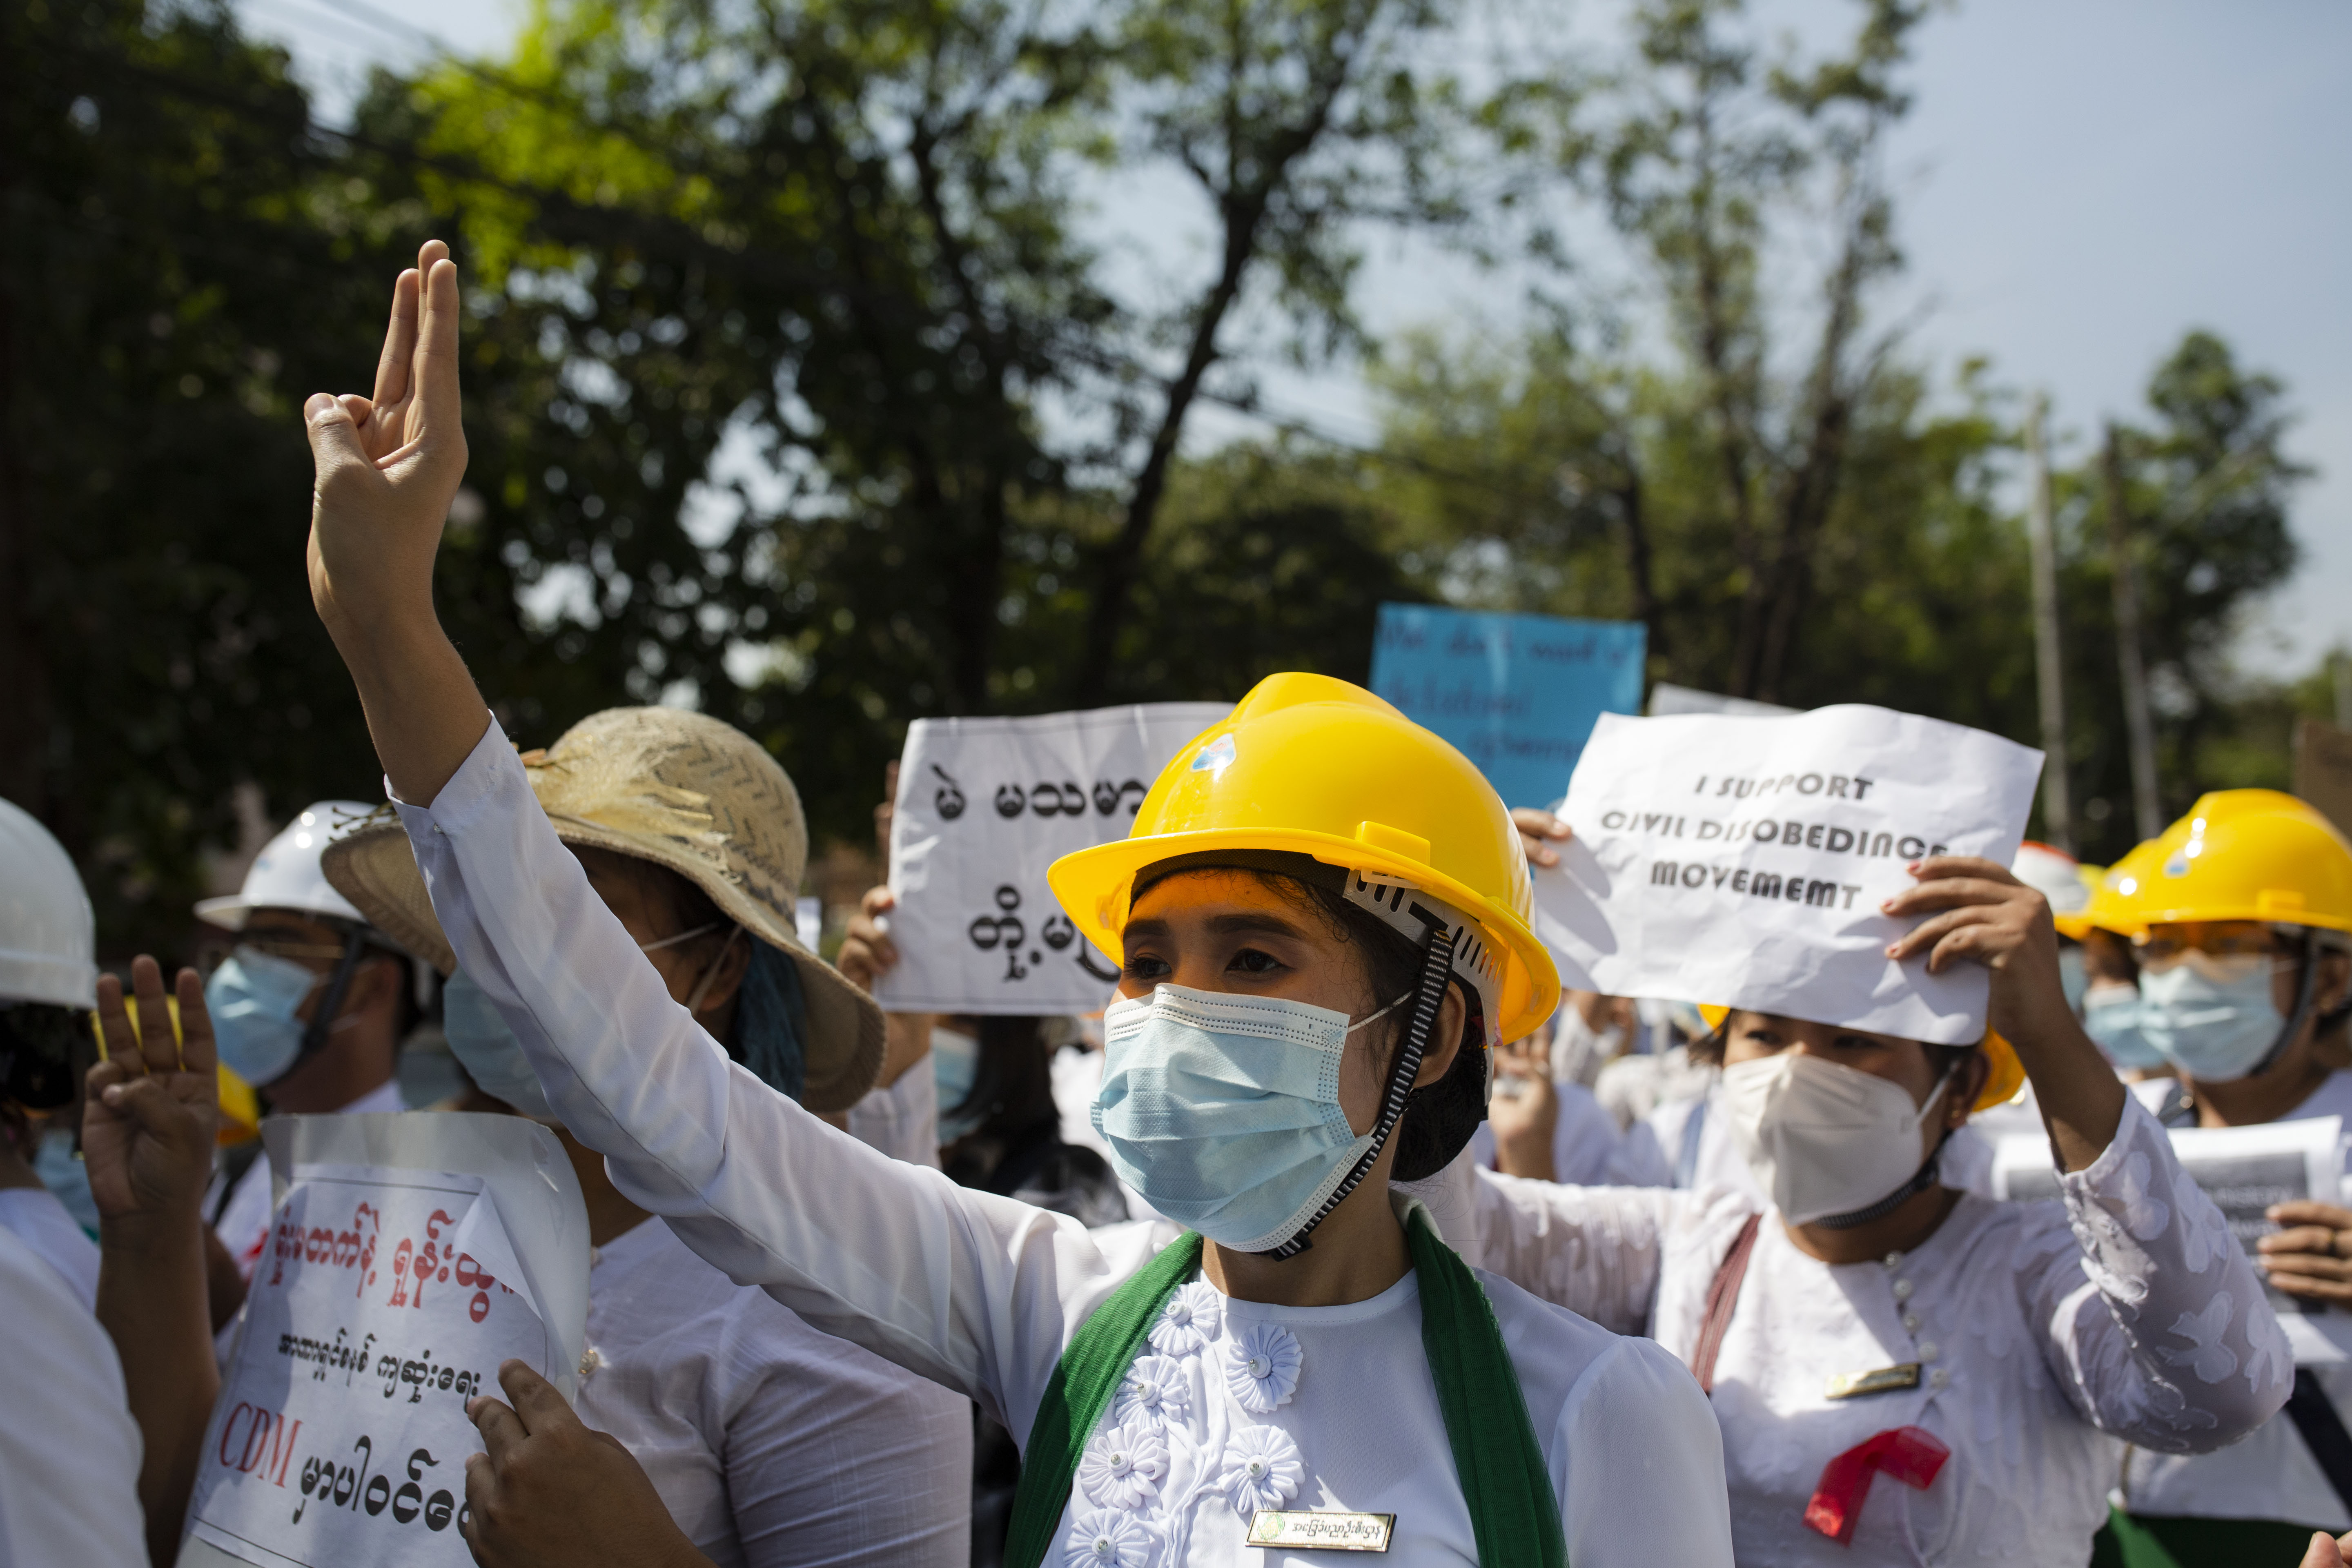 Workers wearing white clothing and face masks protest in Myanmar. Many are holding signs.